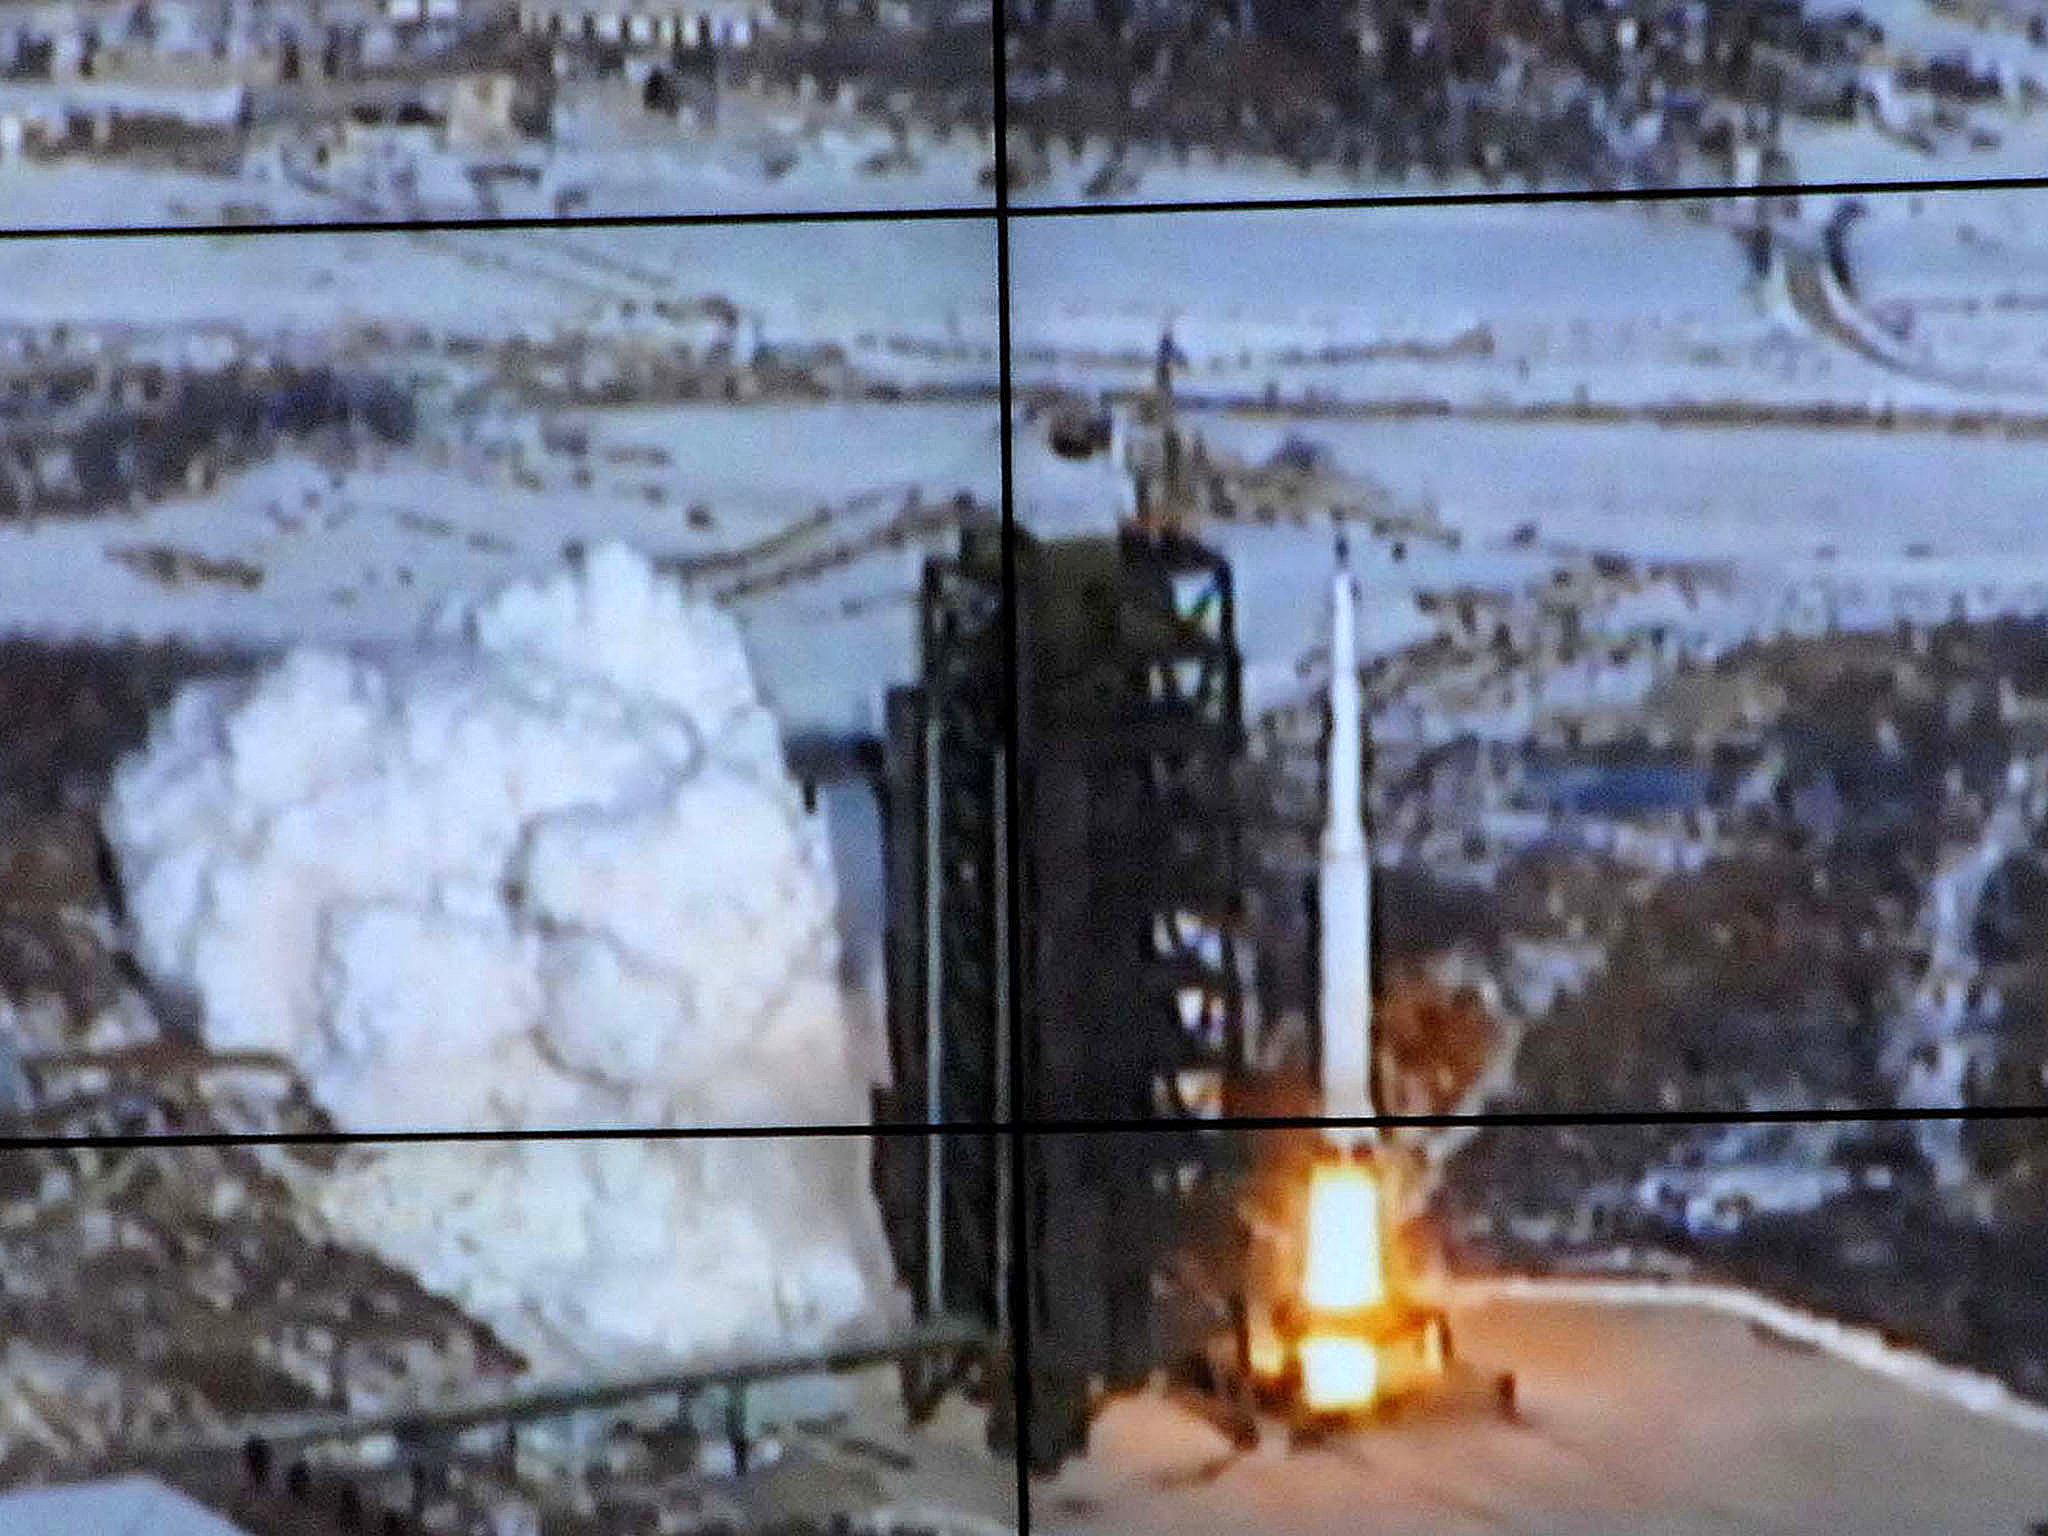 This picture received from North Korea's official Korean Central News Agency on December 12, 2012 shows the rocket Unha-3, carrying the satellite Kwangmyongsong-3, being monitored on a large screen at a satellite control center in Cholsan county, North Pyongan province in North Korea. North Korea confirmed it had launched a long-range rocket and succeeded in its mission of placing a satellite into orbit.